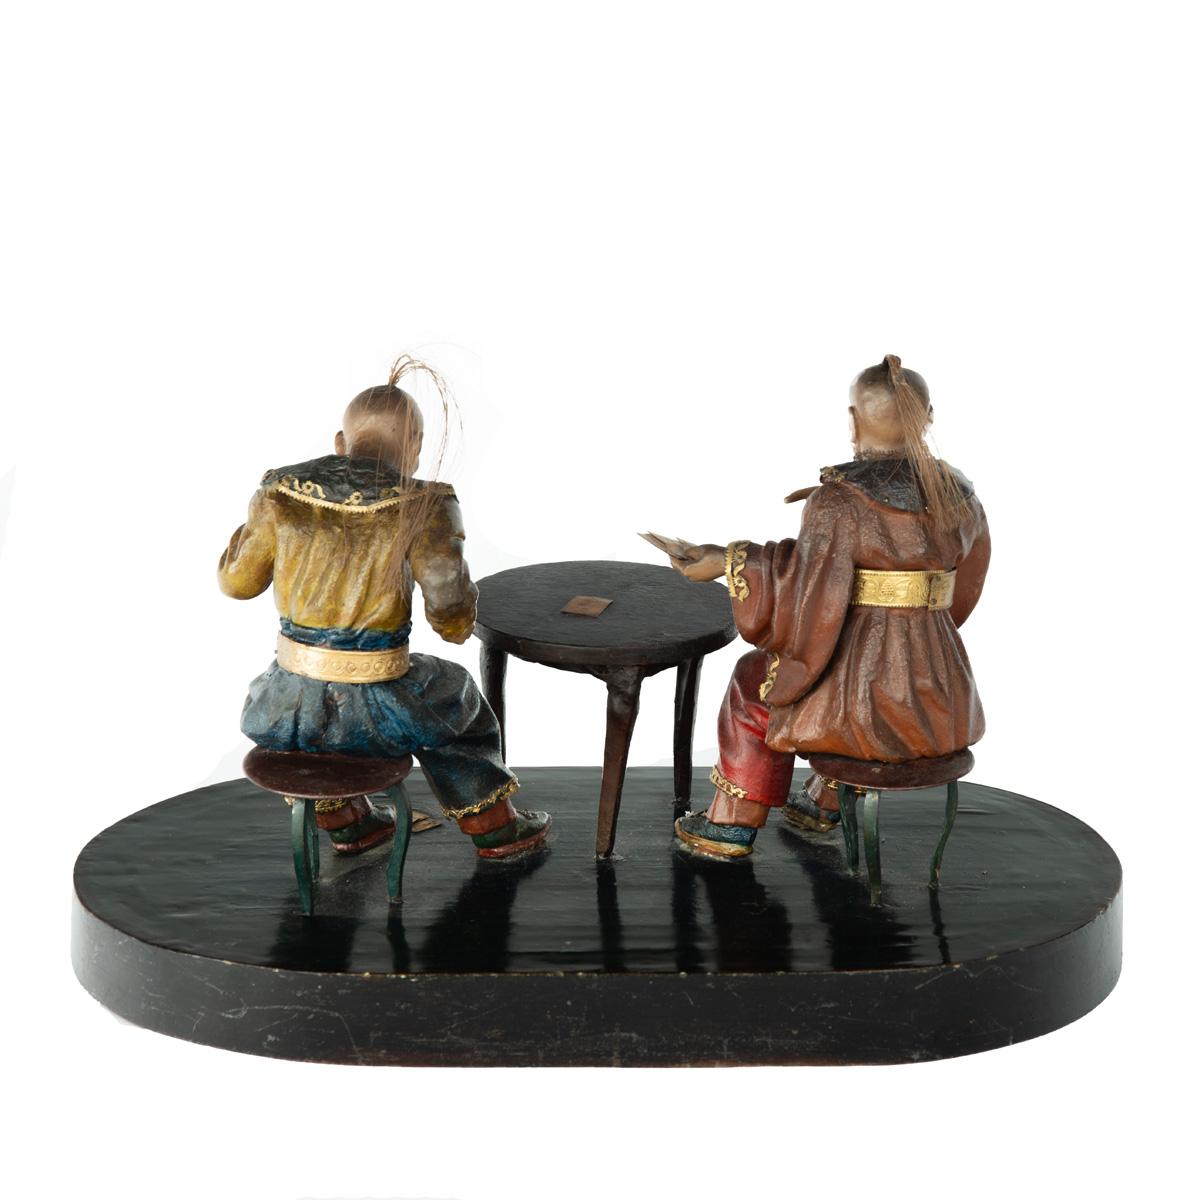 A rare Anglo-Chinese Regency polychrome painted wax and wood group of two Chinese card players, both with nodding heads with horsetail top-knots, wearing jackets with large collars, one with wide-sleeves,  gilt belts and voluminous trousers, seated